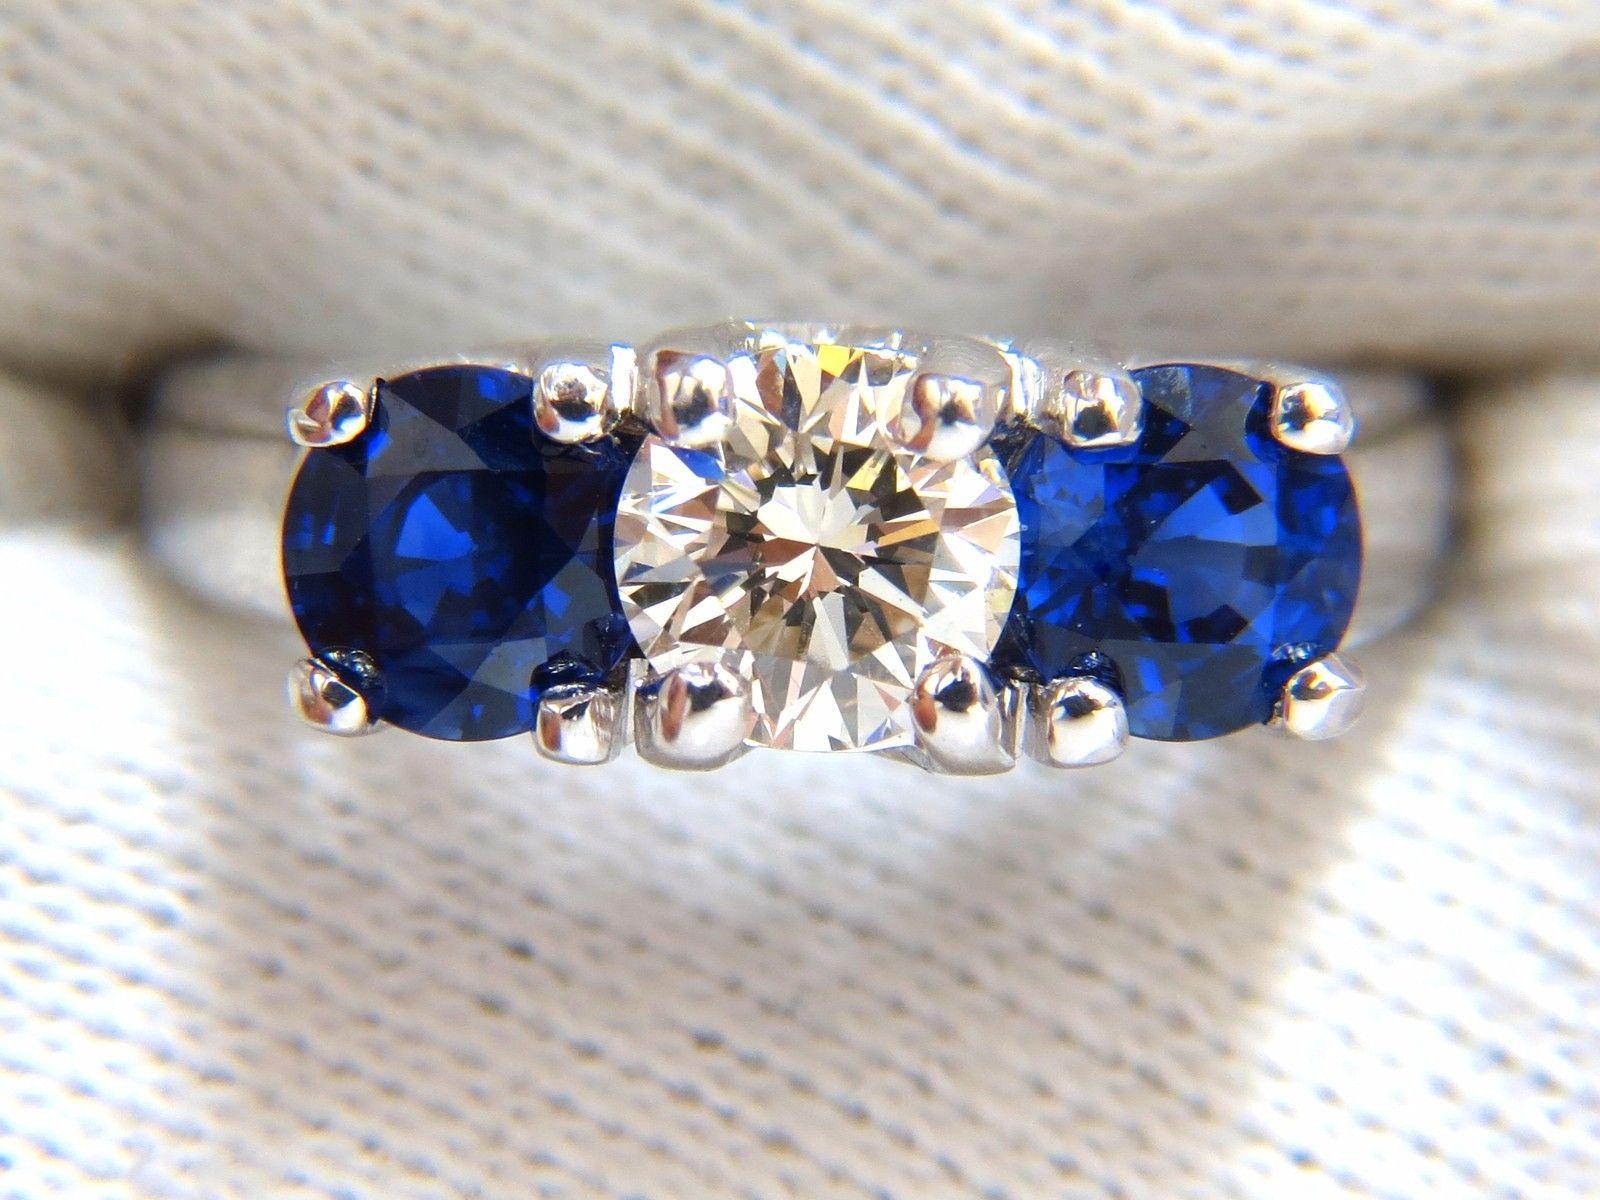 Classic Diamond & Sapphires, Three Stone

.80ct. Round Cut diamond

Full Cut Brilliant

J-color Vs-2 Clarity

5.8mm



Side Round Natural Blue Sapphires: 1.68ct. 

Vibrant Royal Blue & transparent

Full cut and Full Faceted.

Gorgeous three stone